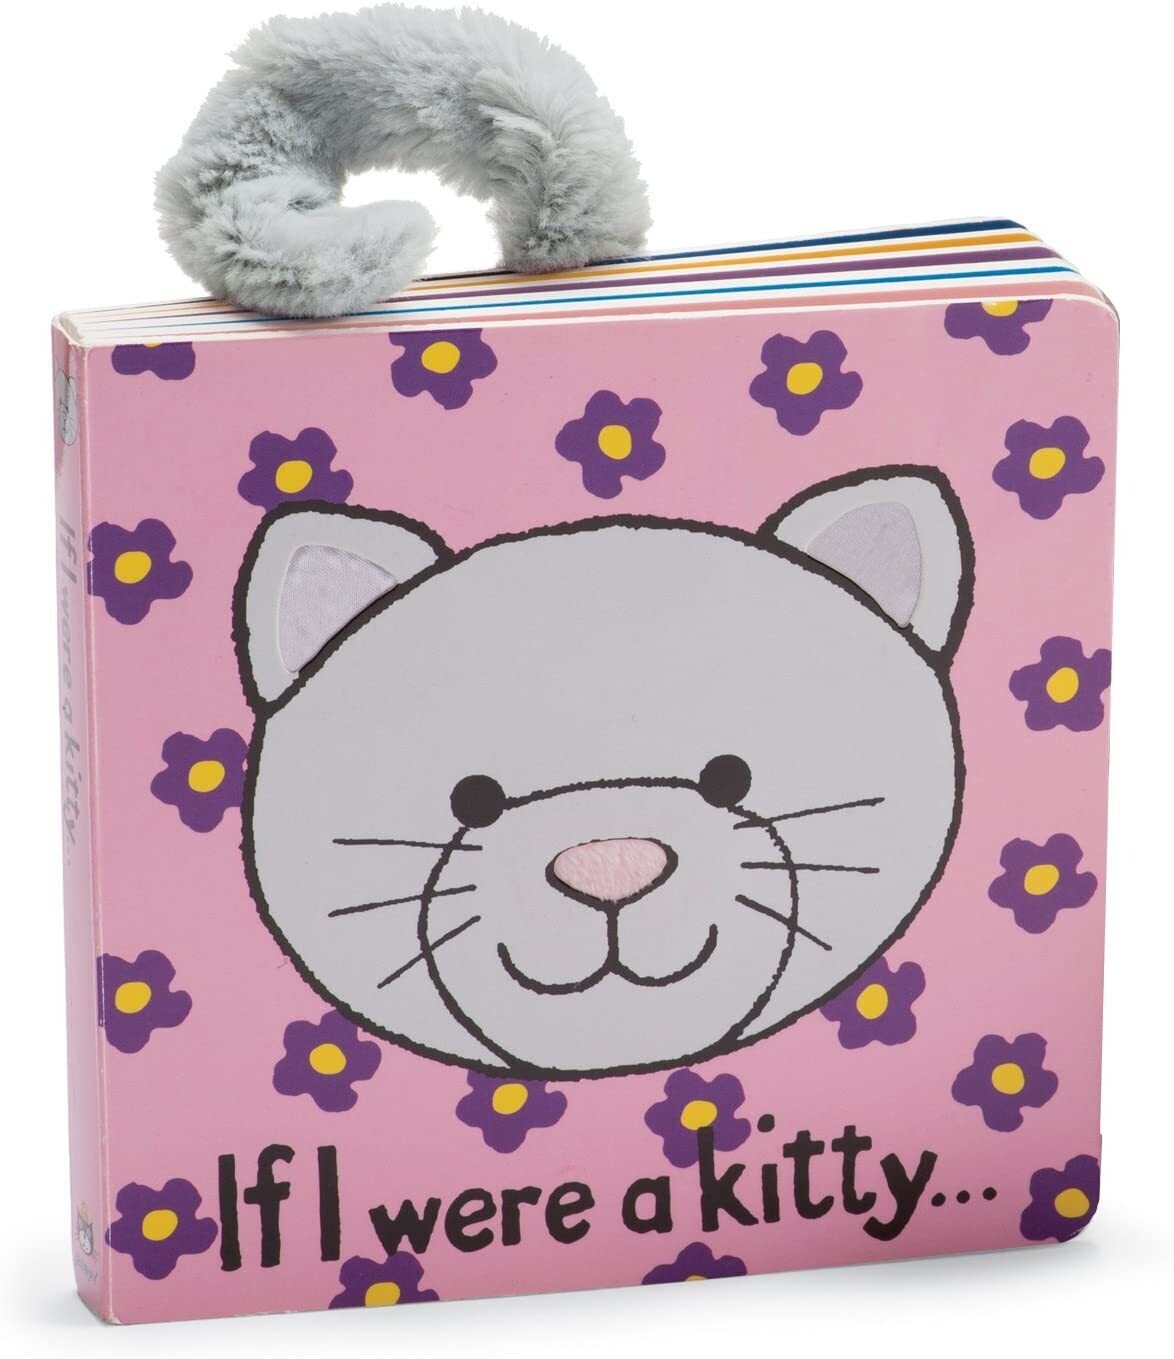 Book - If I Were a Kitty Book (Grey)